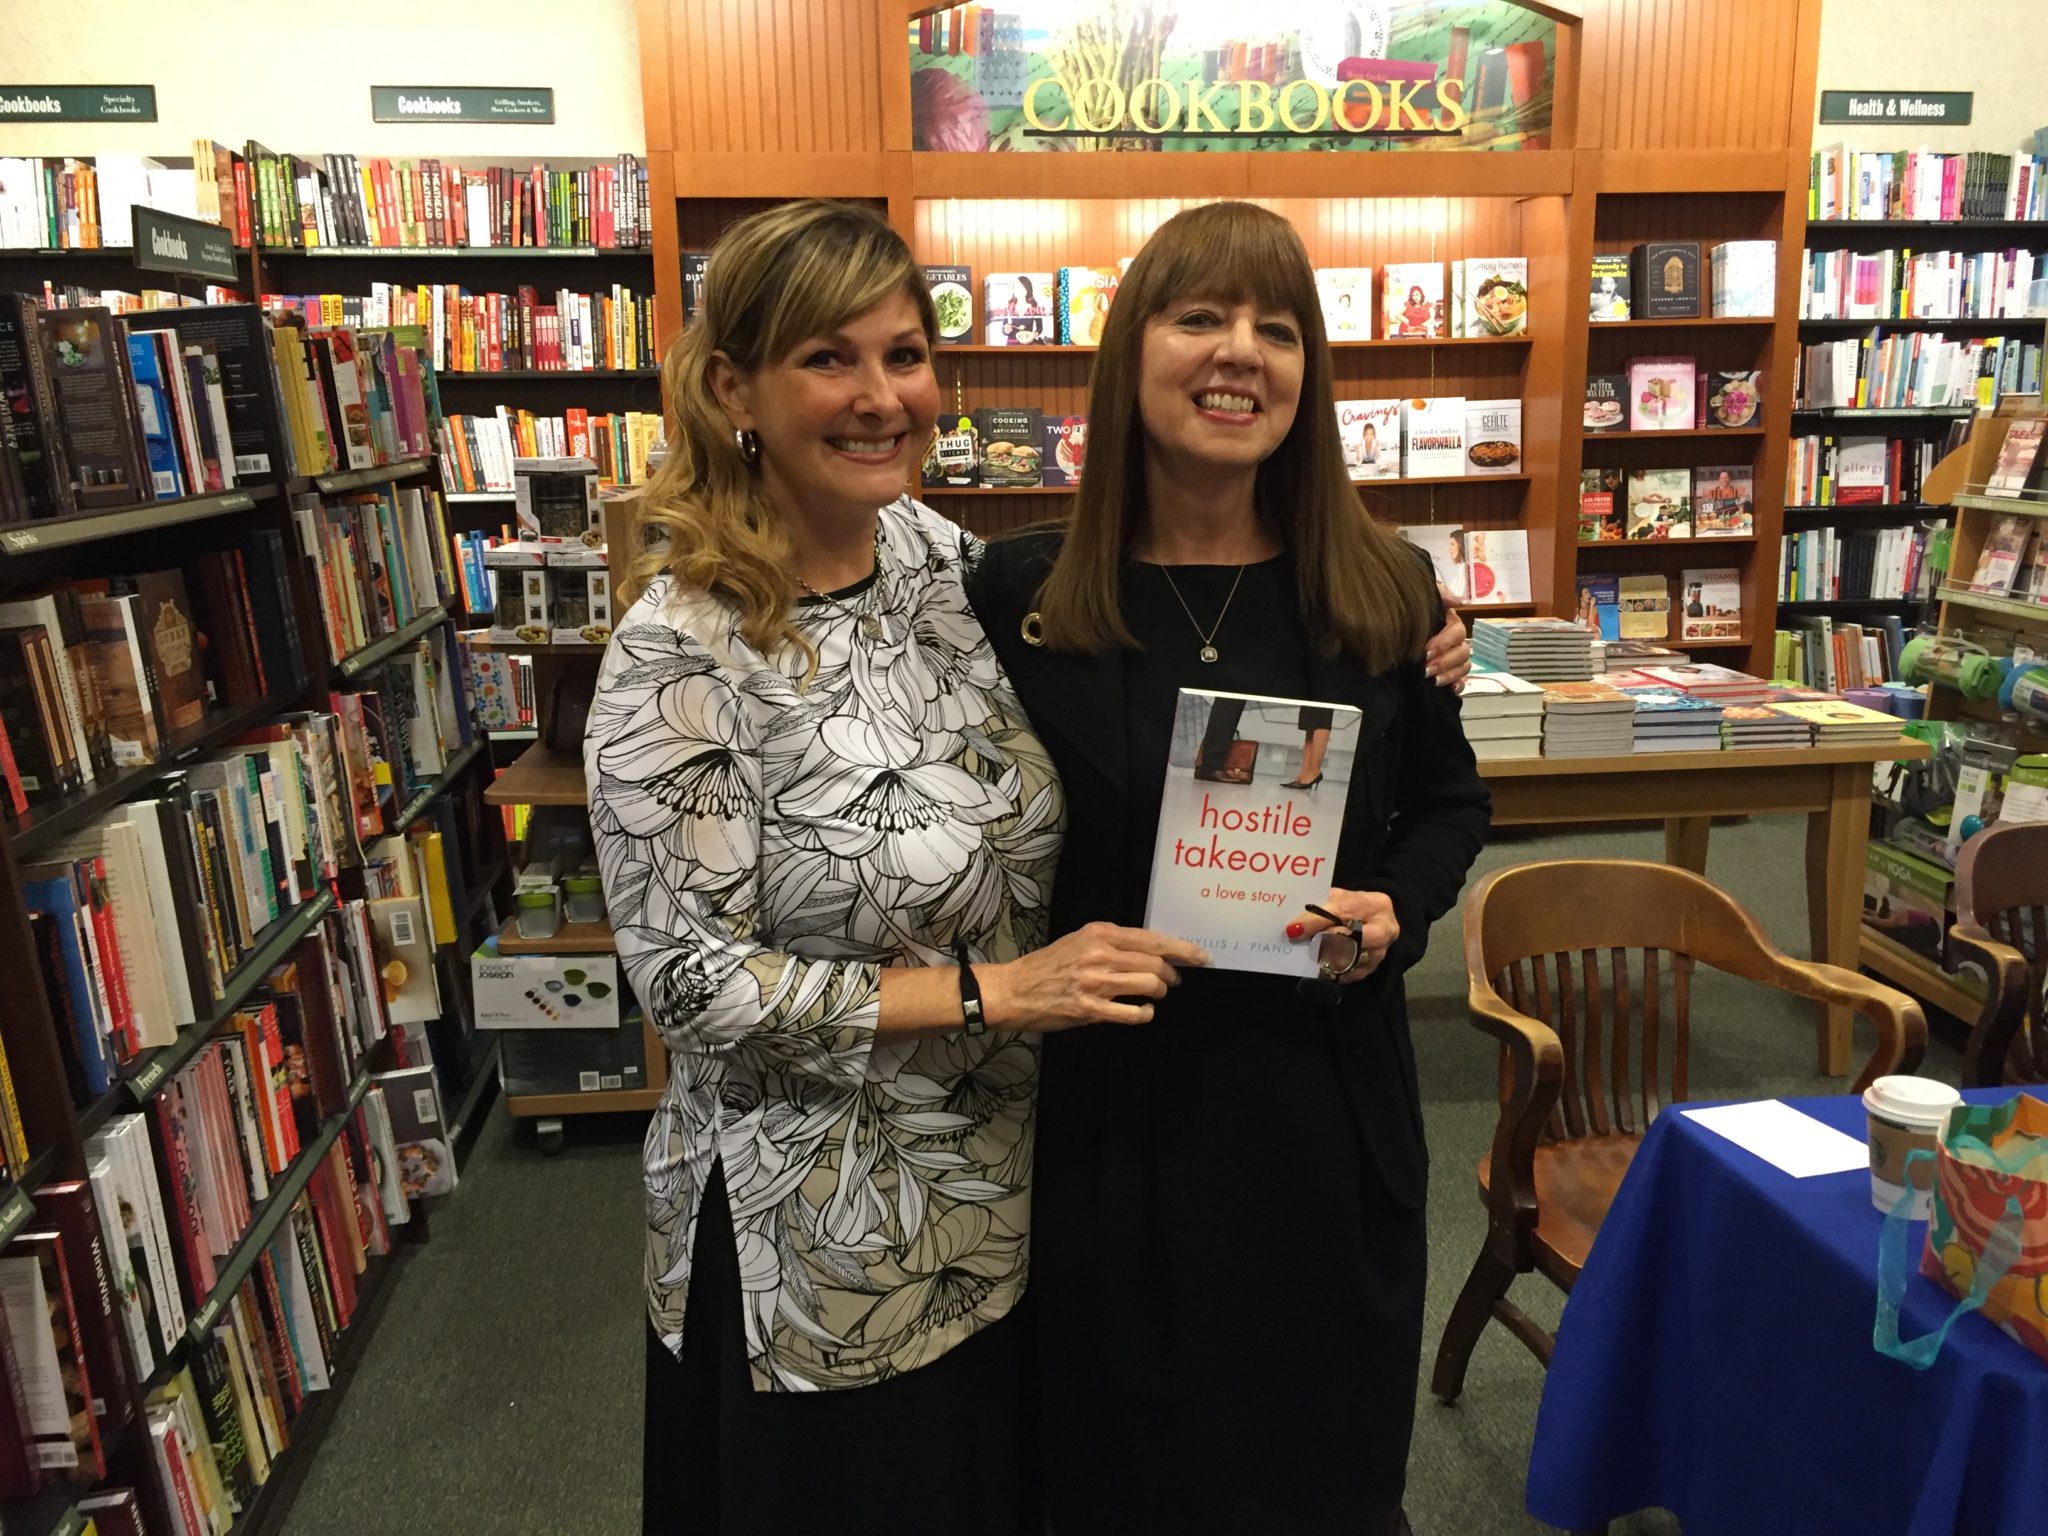 sandy-and-phyllis-at-book-event